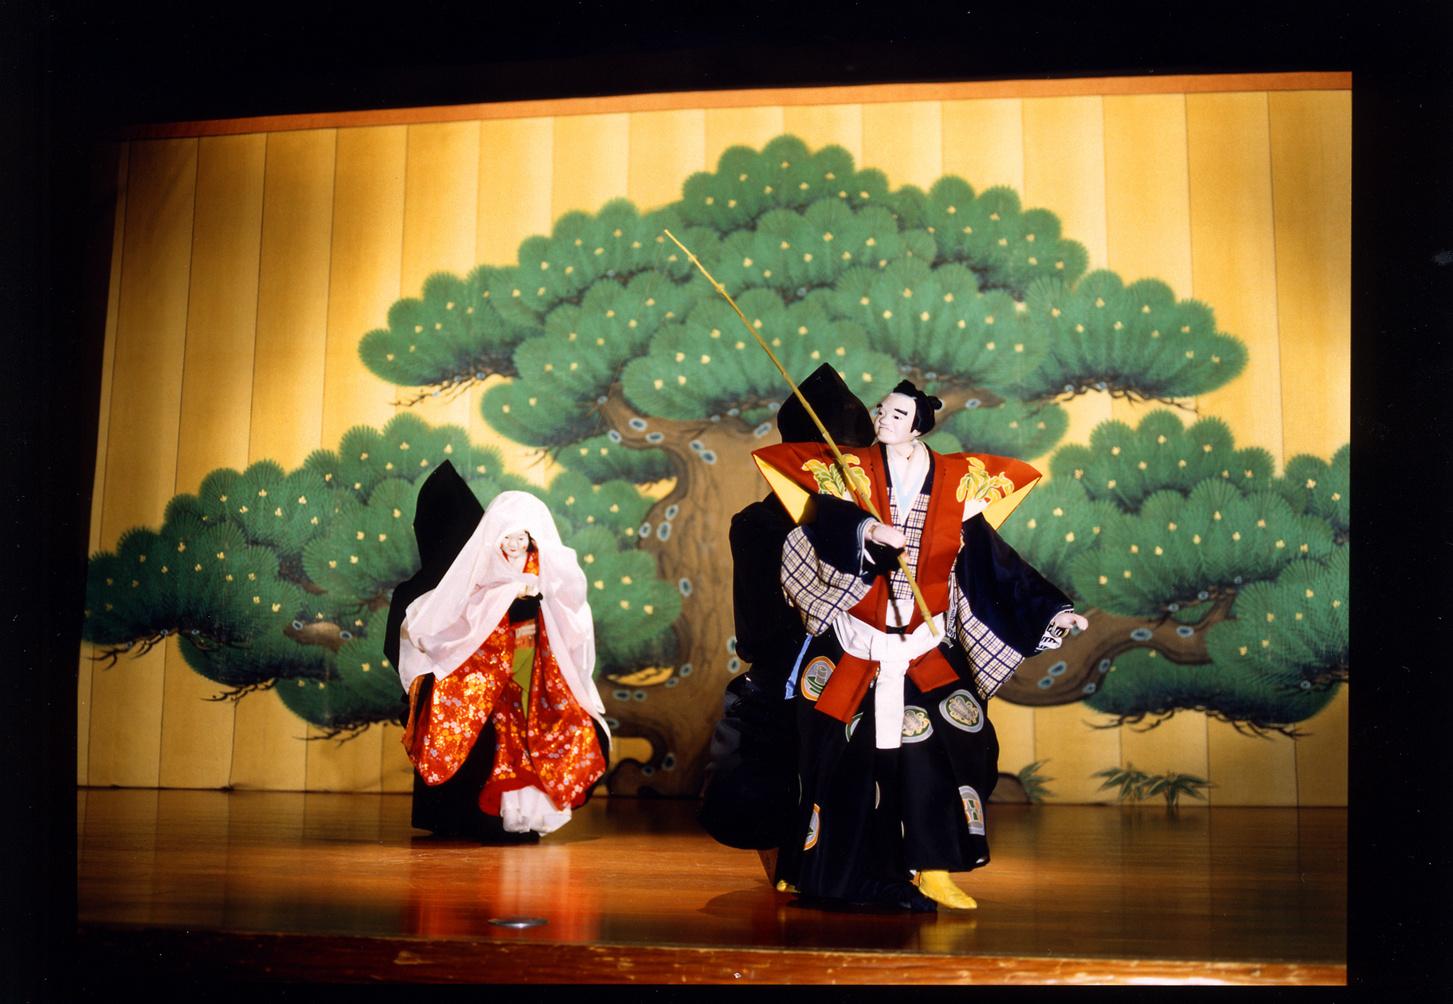 The Leisure and Cultural Services Department will present the puppetry performance "Hachioji Kuruma Ningyo" by the Koryu Nishikawa Troupe in June. Photo shows a scene from "Tsurionna".